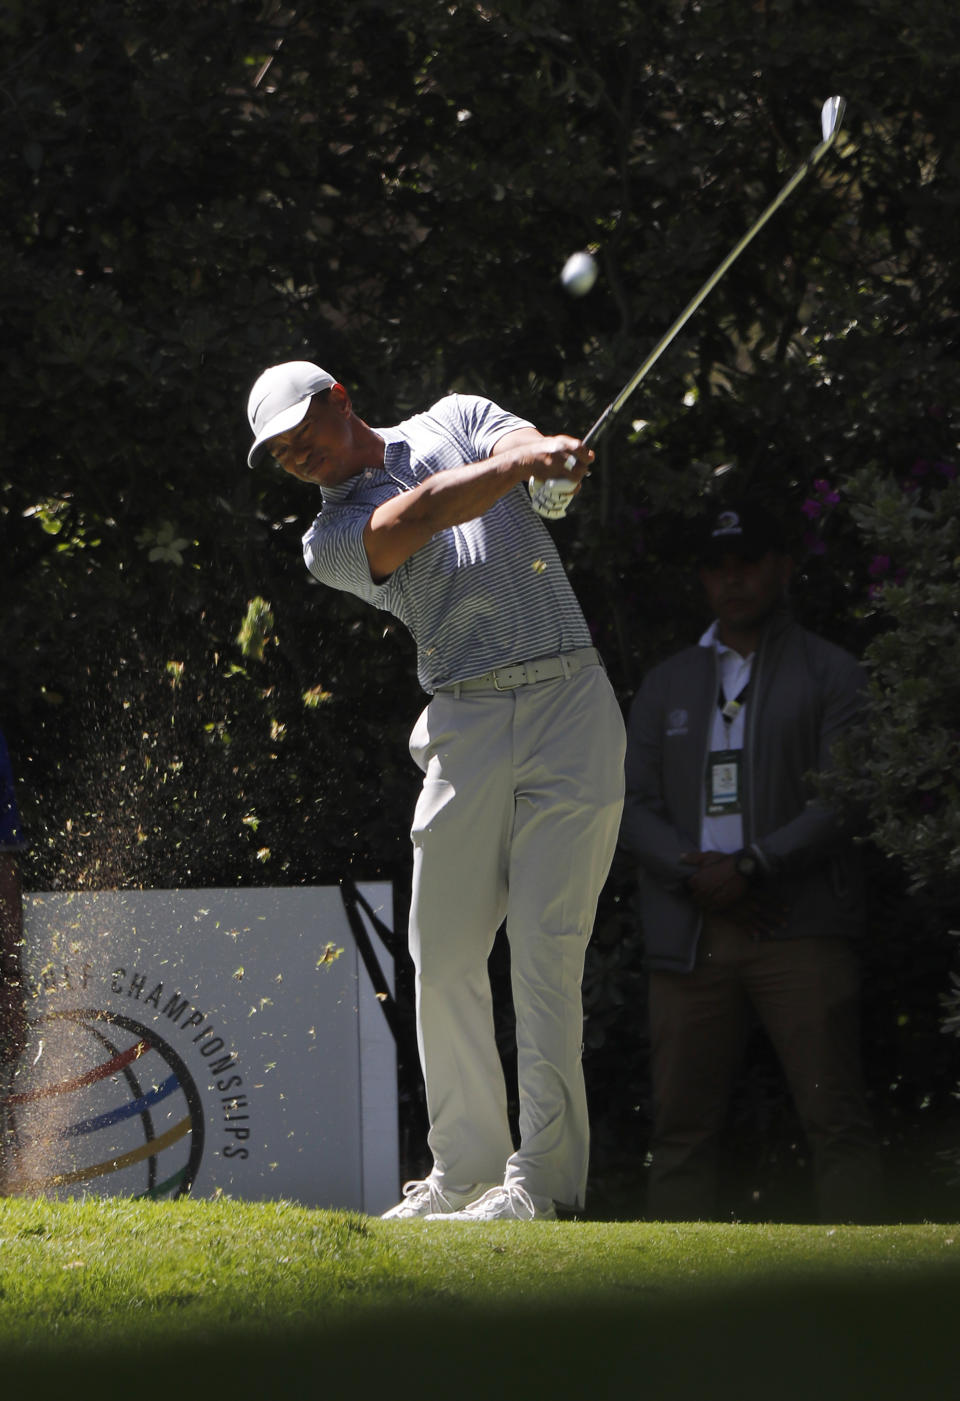 Tiger Woods hits the ball on the second hole during the first day of competition of the WGC-Mexico Championship at the Chapultepec Golf Club in Mexico City, Thursday, Feb. 21, 2019. (AP Photo/Marco Ugarte)